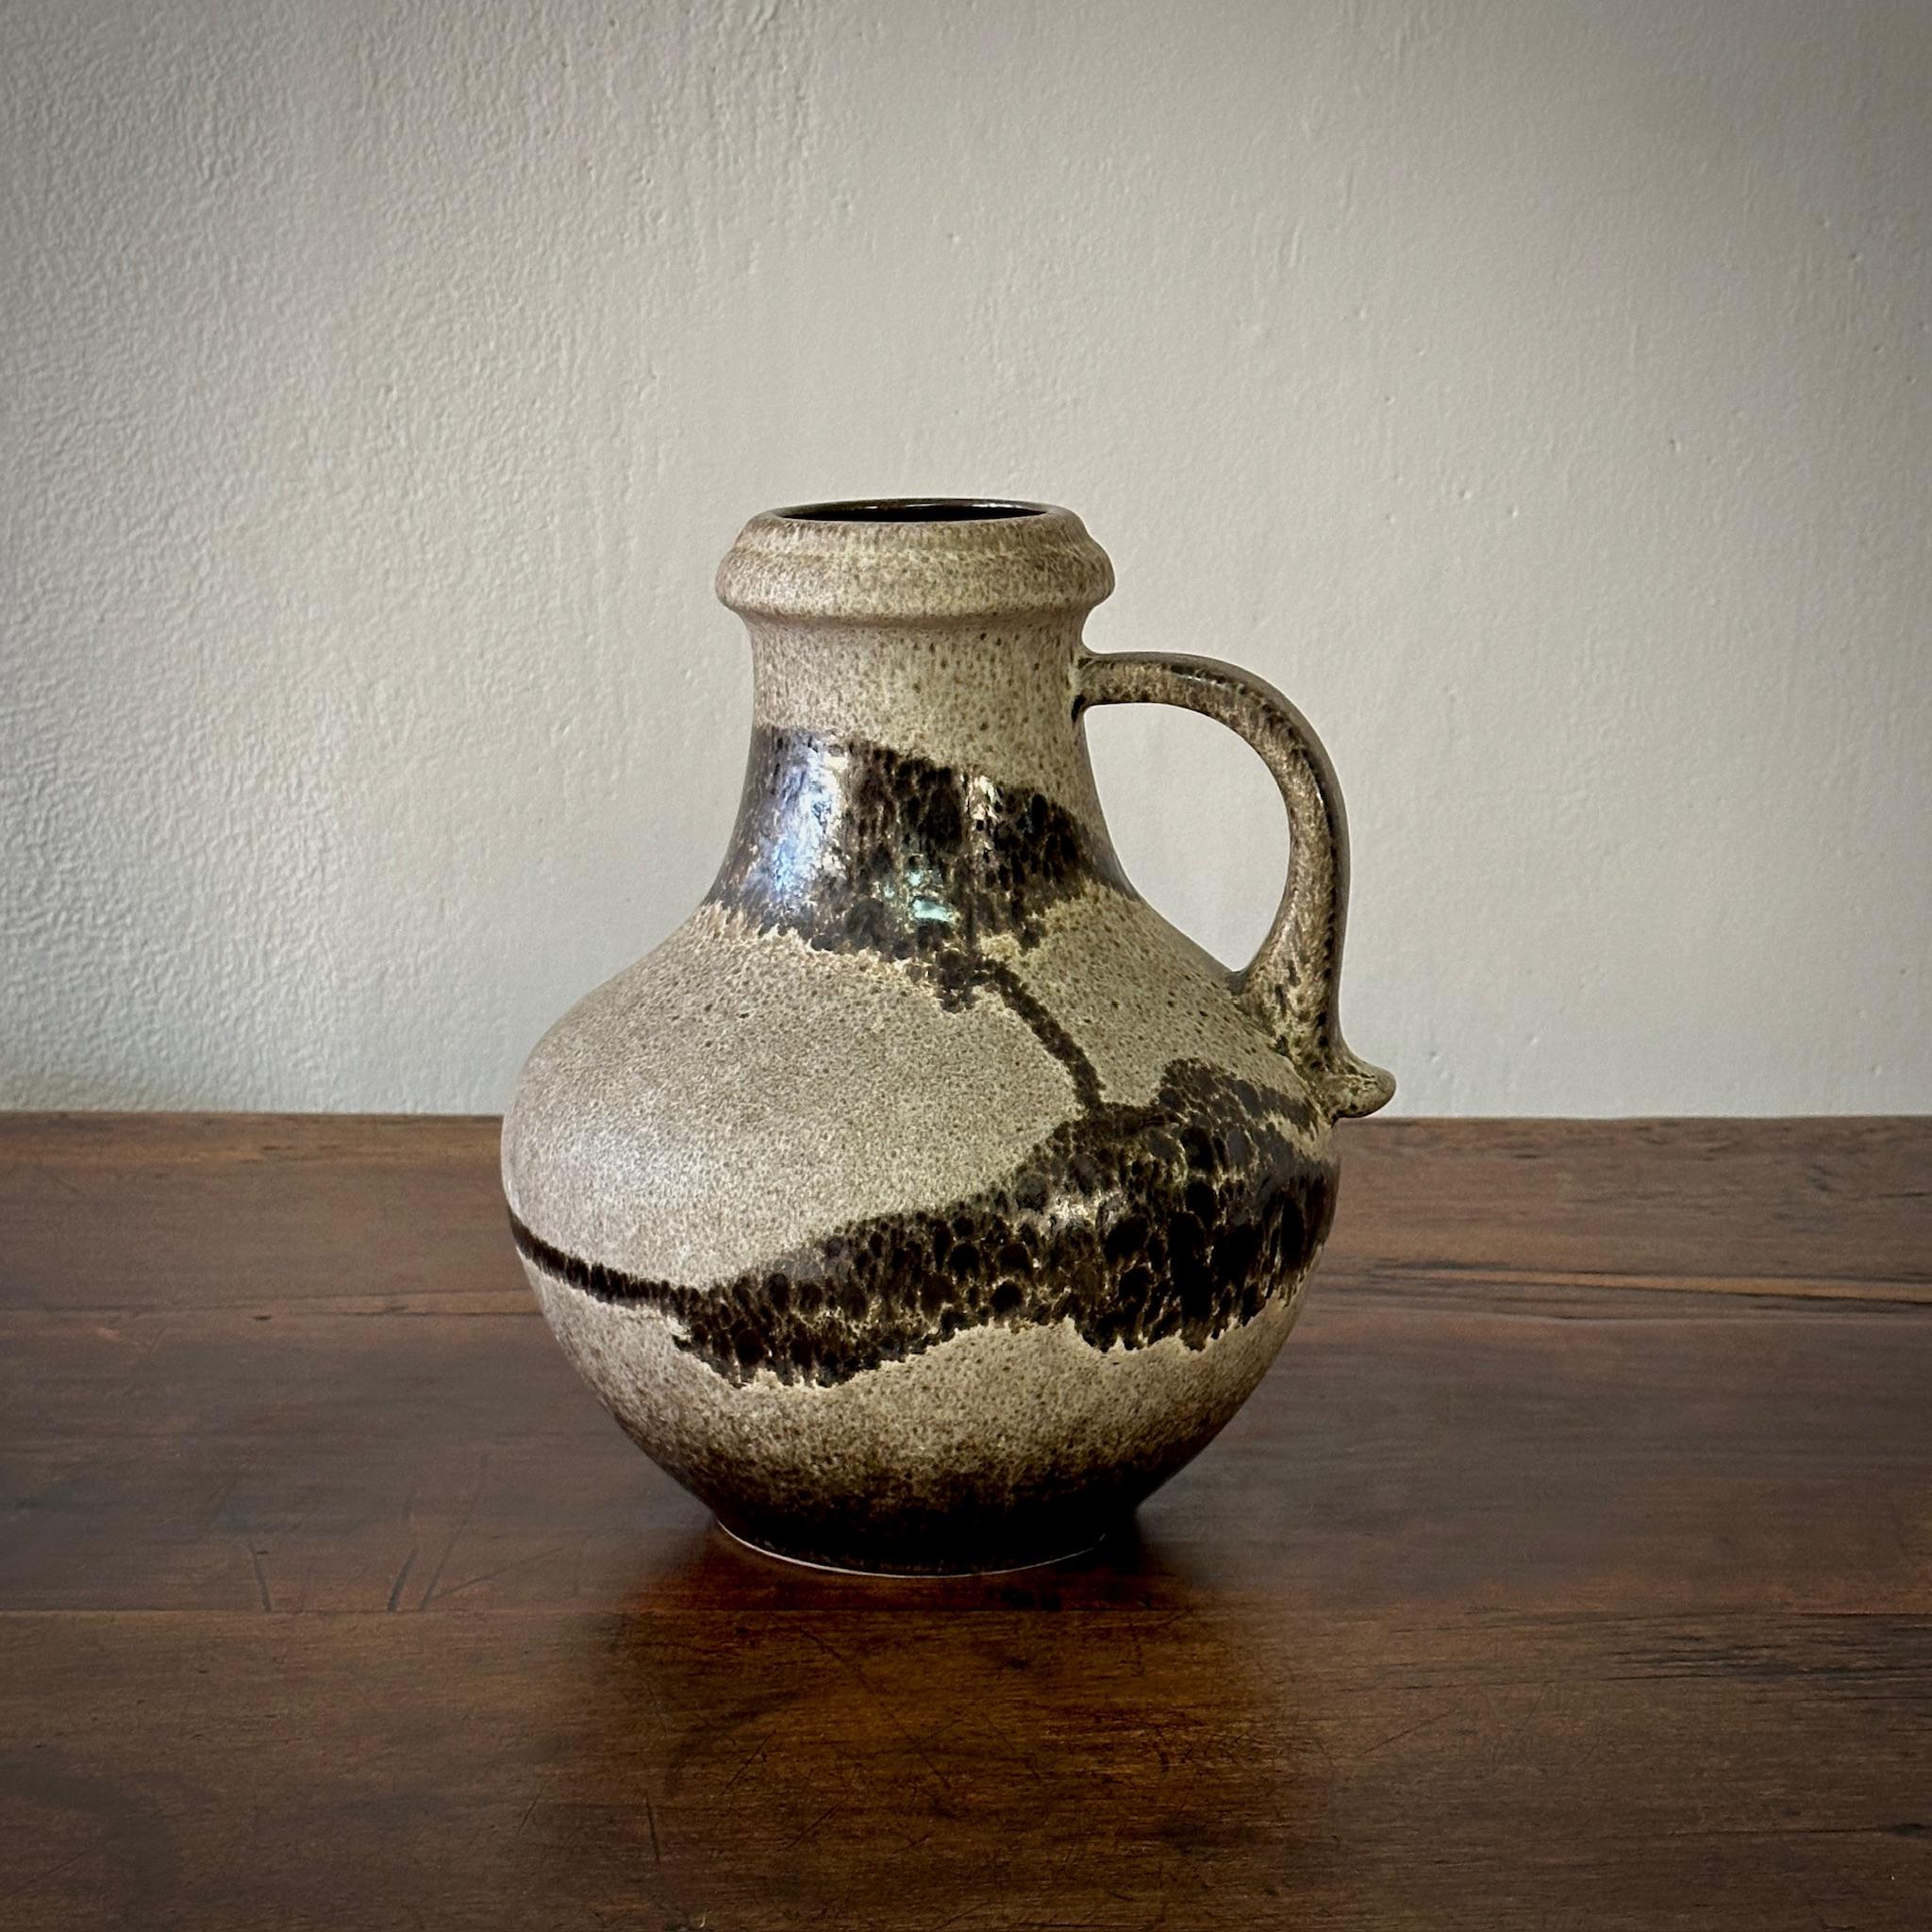 A Belgian glazed ceramic vessel in a pitcher form with deep earth and brown toned glazes. Functional on its own or as a statement displayed in a group with our collection of pottery vessels

Belgium, circa 1970

Dimensions: 9.5W x 8.5D x 11.5H